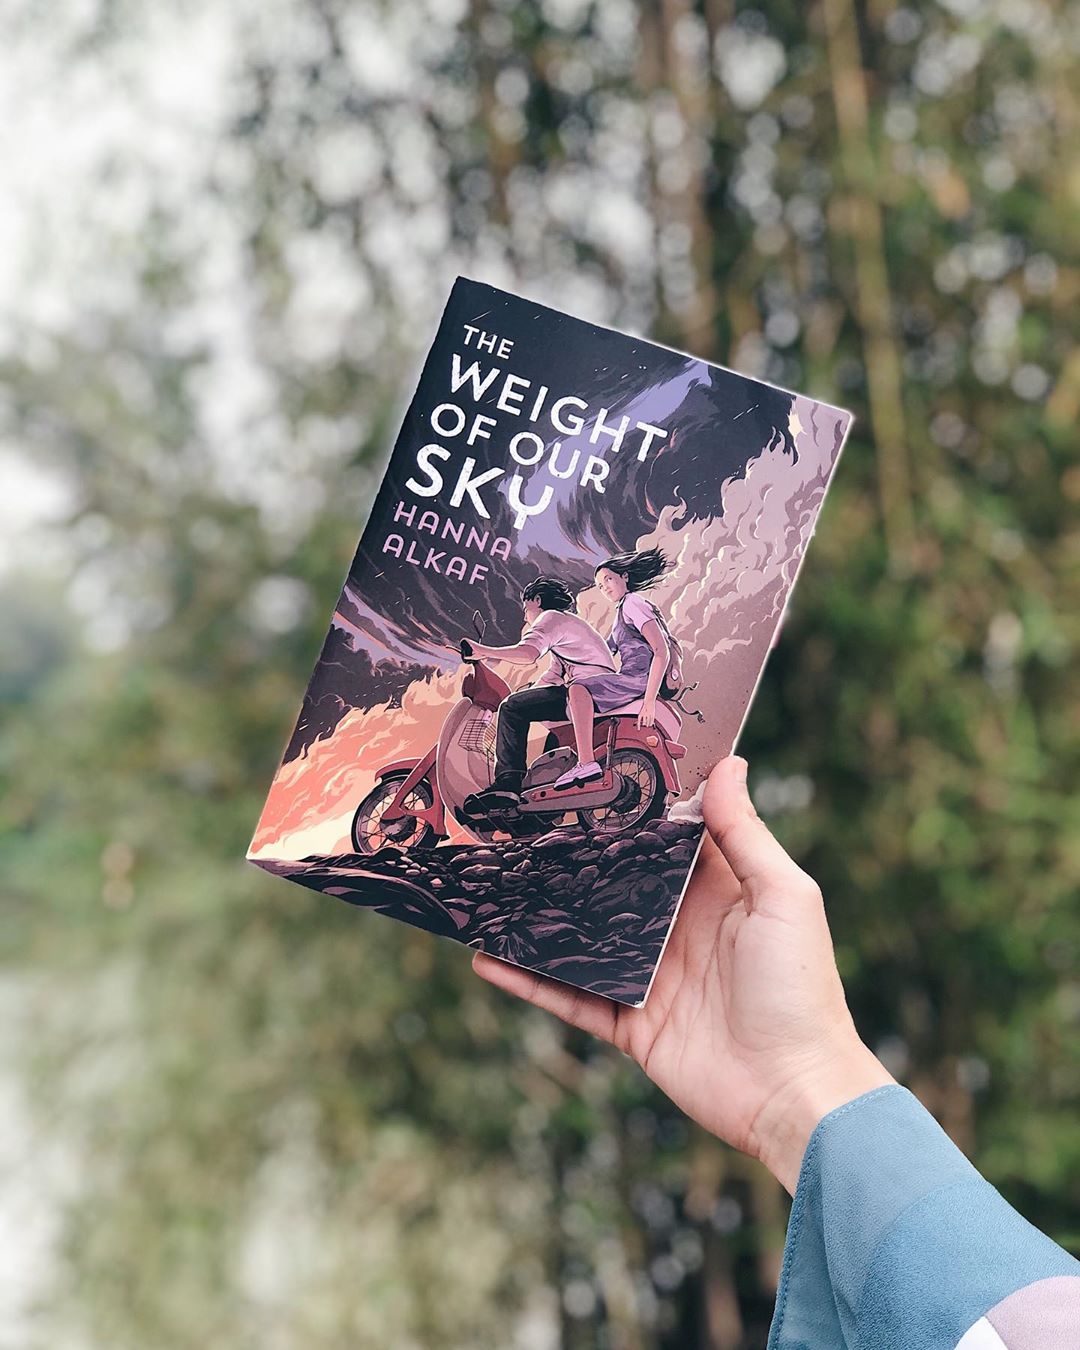 New Malaysian novels - The Weight of Our Sky